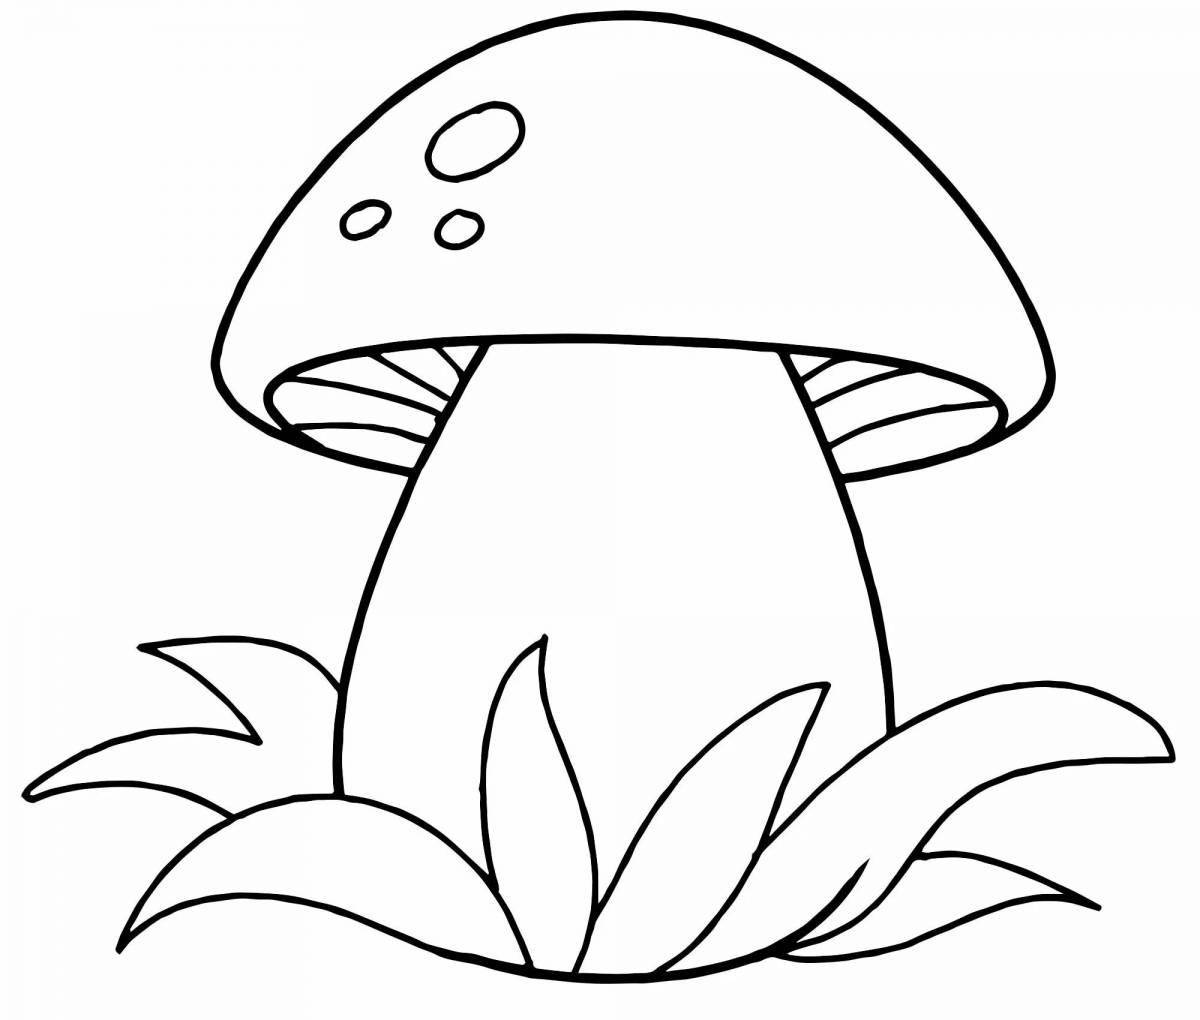 Magic mushroom coloring book for 6-7 year olds